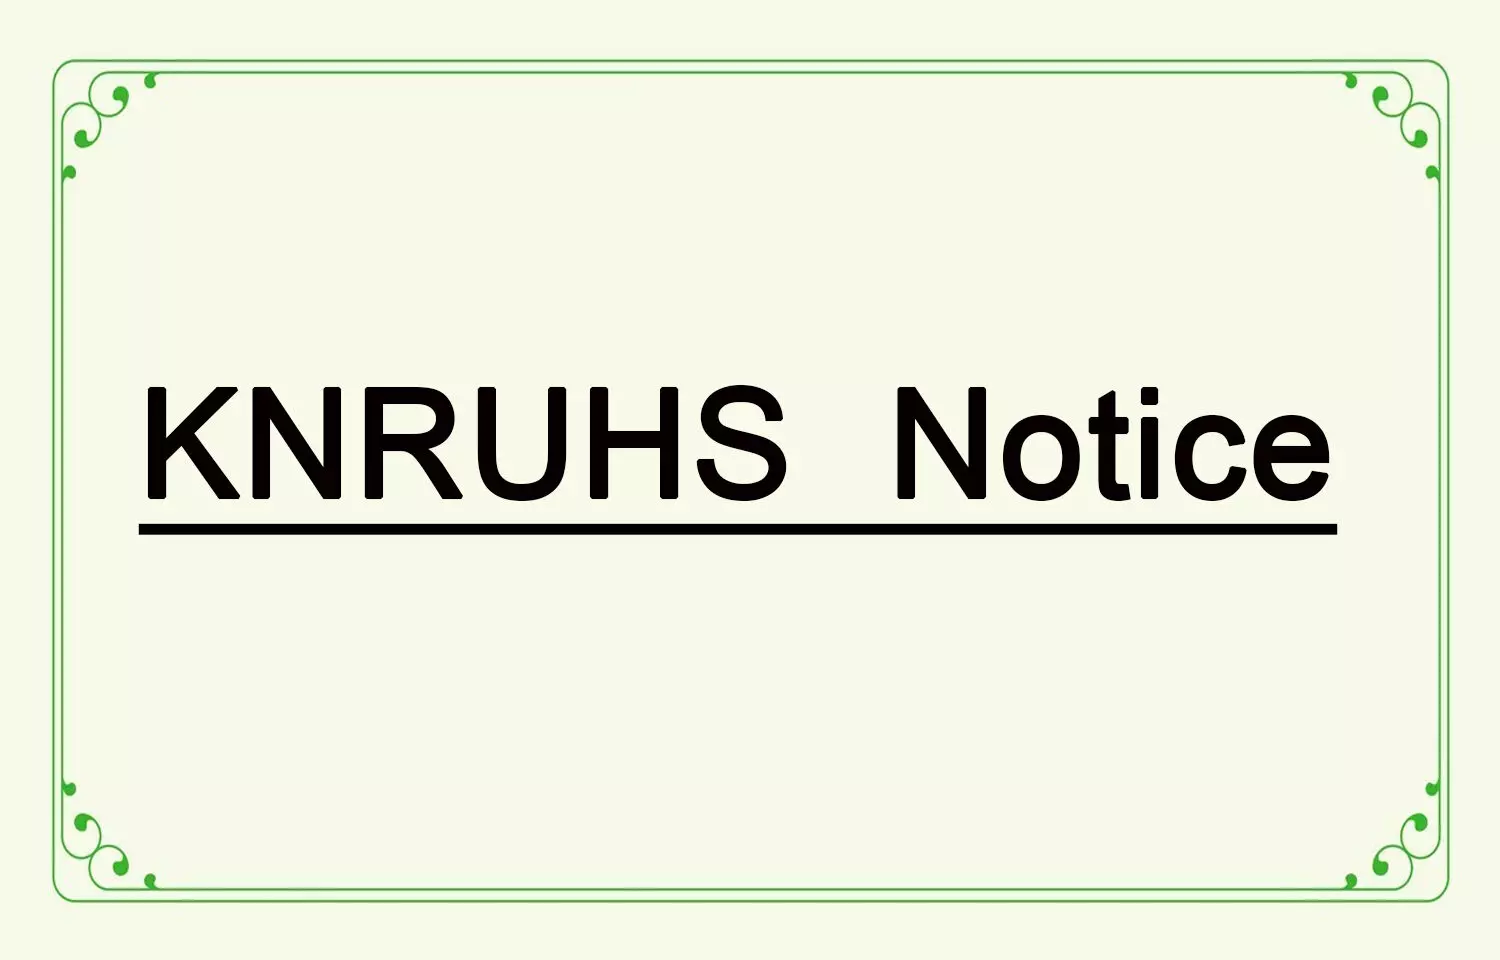 KNRUHS defers PG Medical, SS, Dental exams, calls back students to report for resuming duties